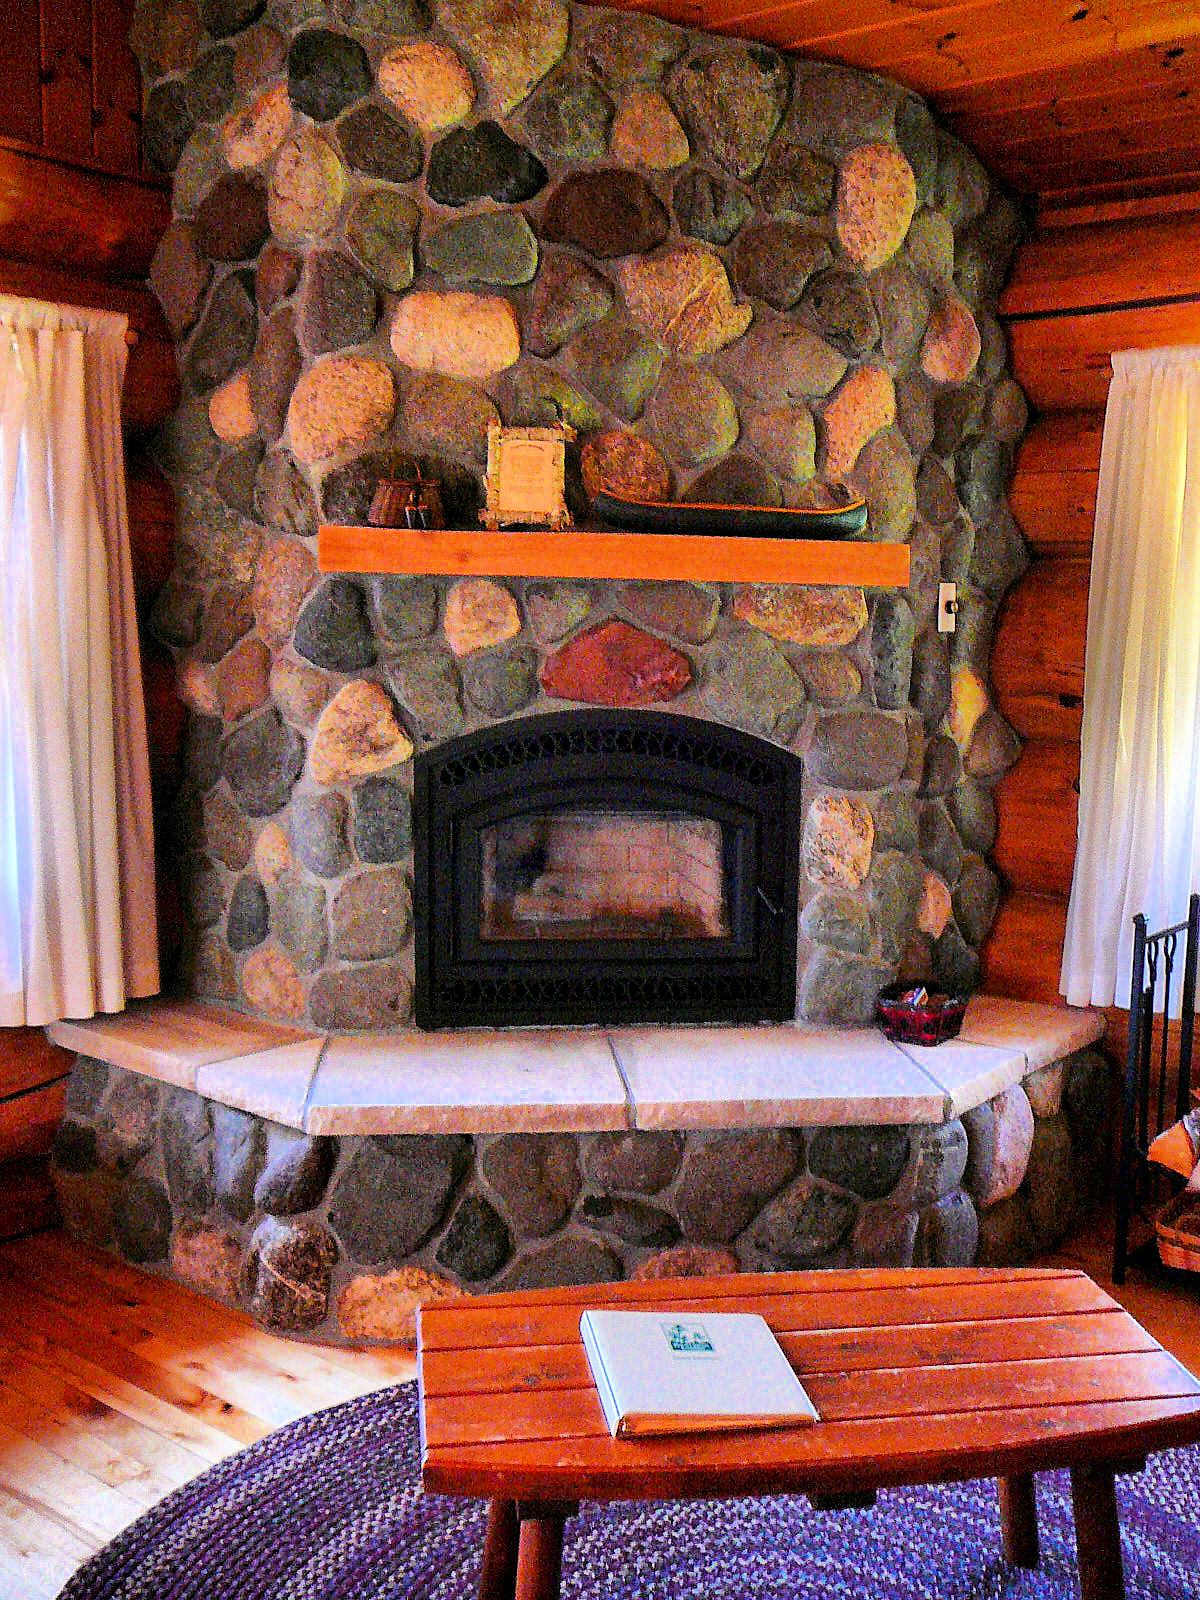 Close up of stone fireplace in a log cabin